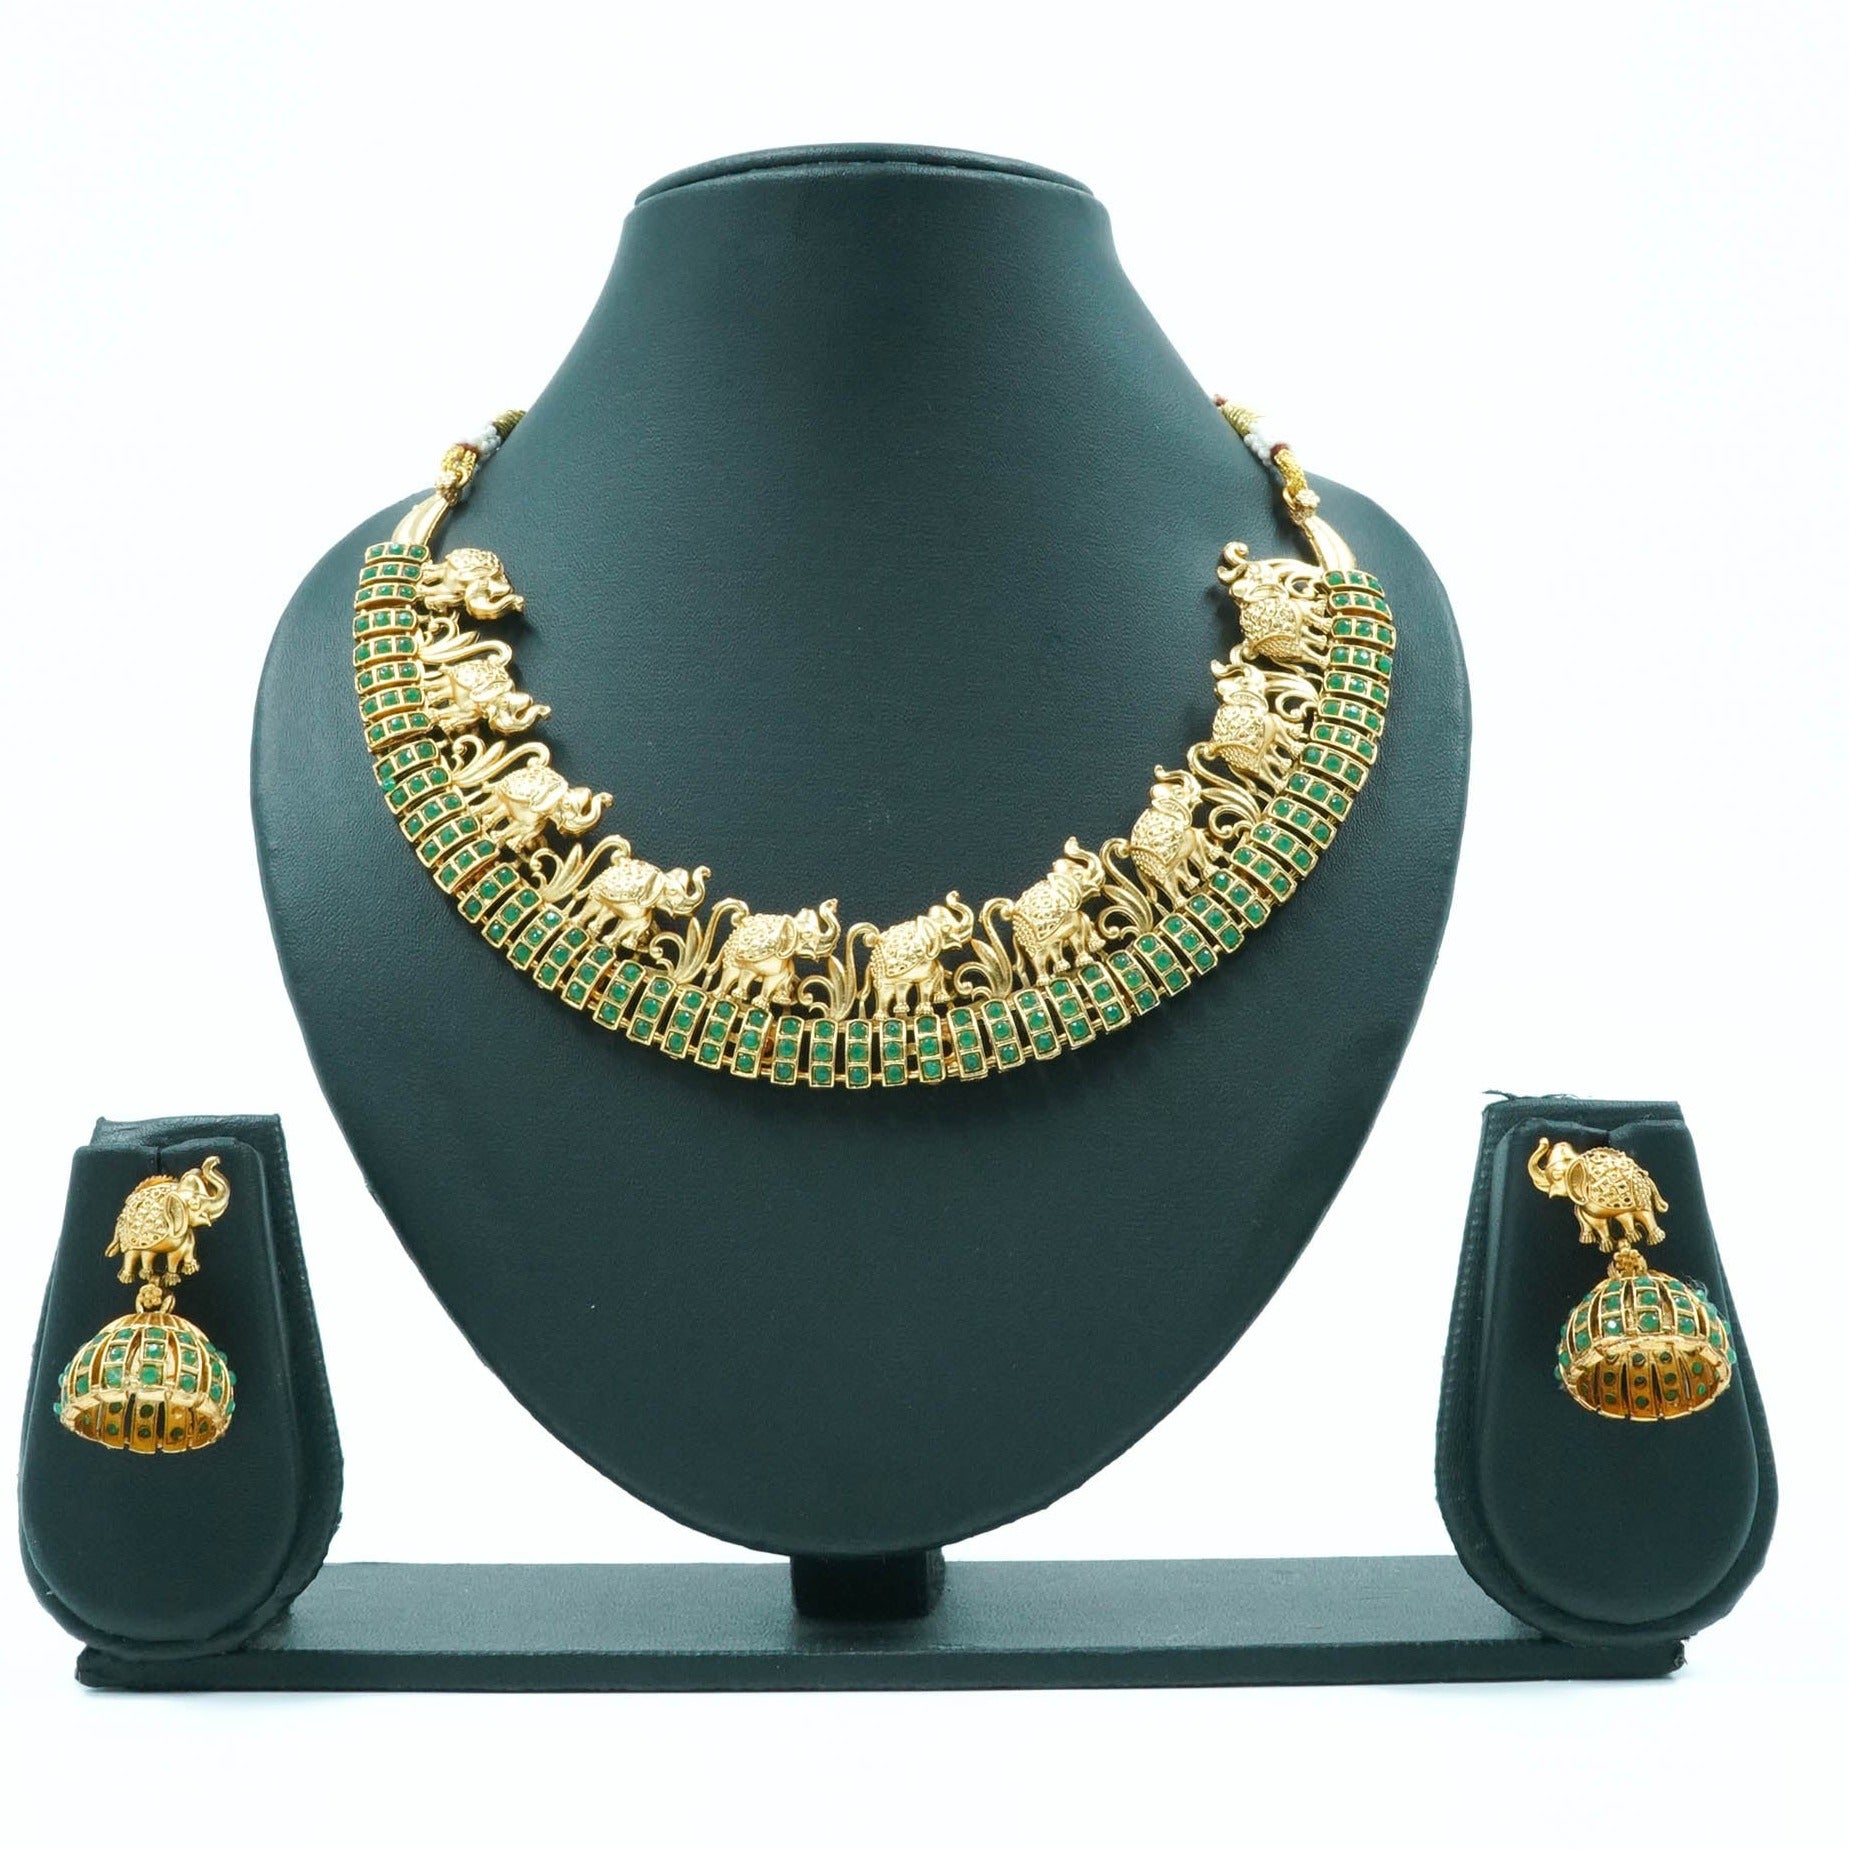 Premium Gold Finish Trending Necklace set with cz stones and Ruby emerald 6557N